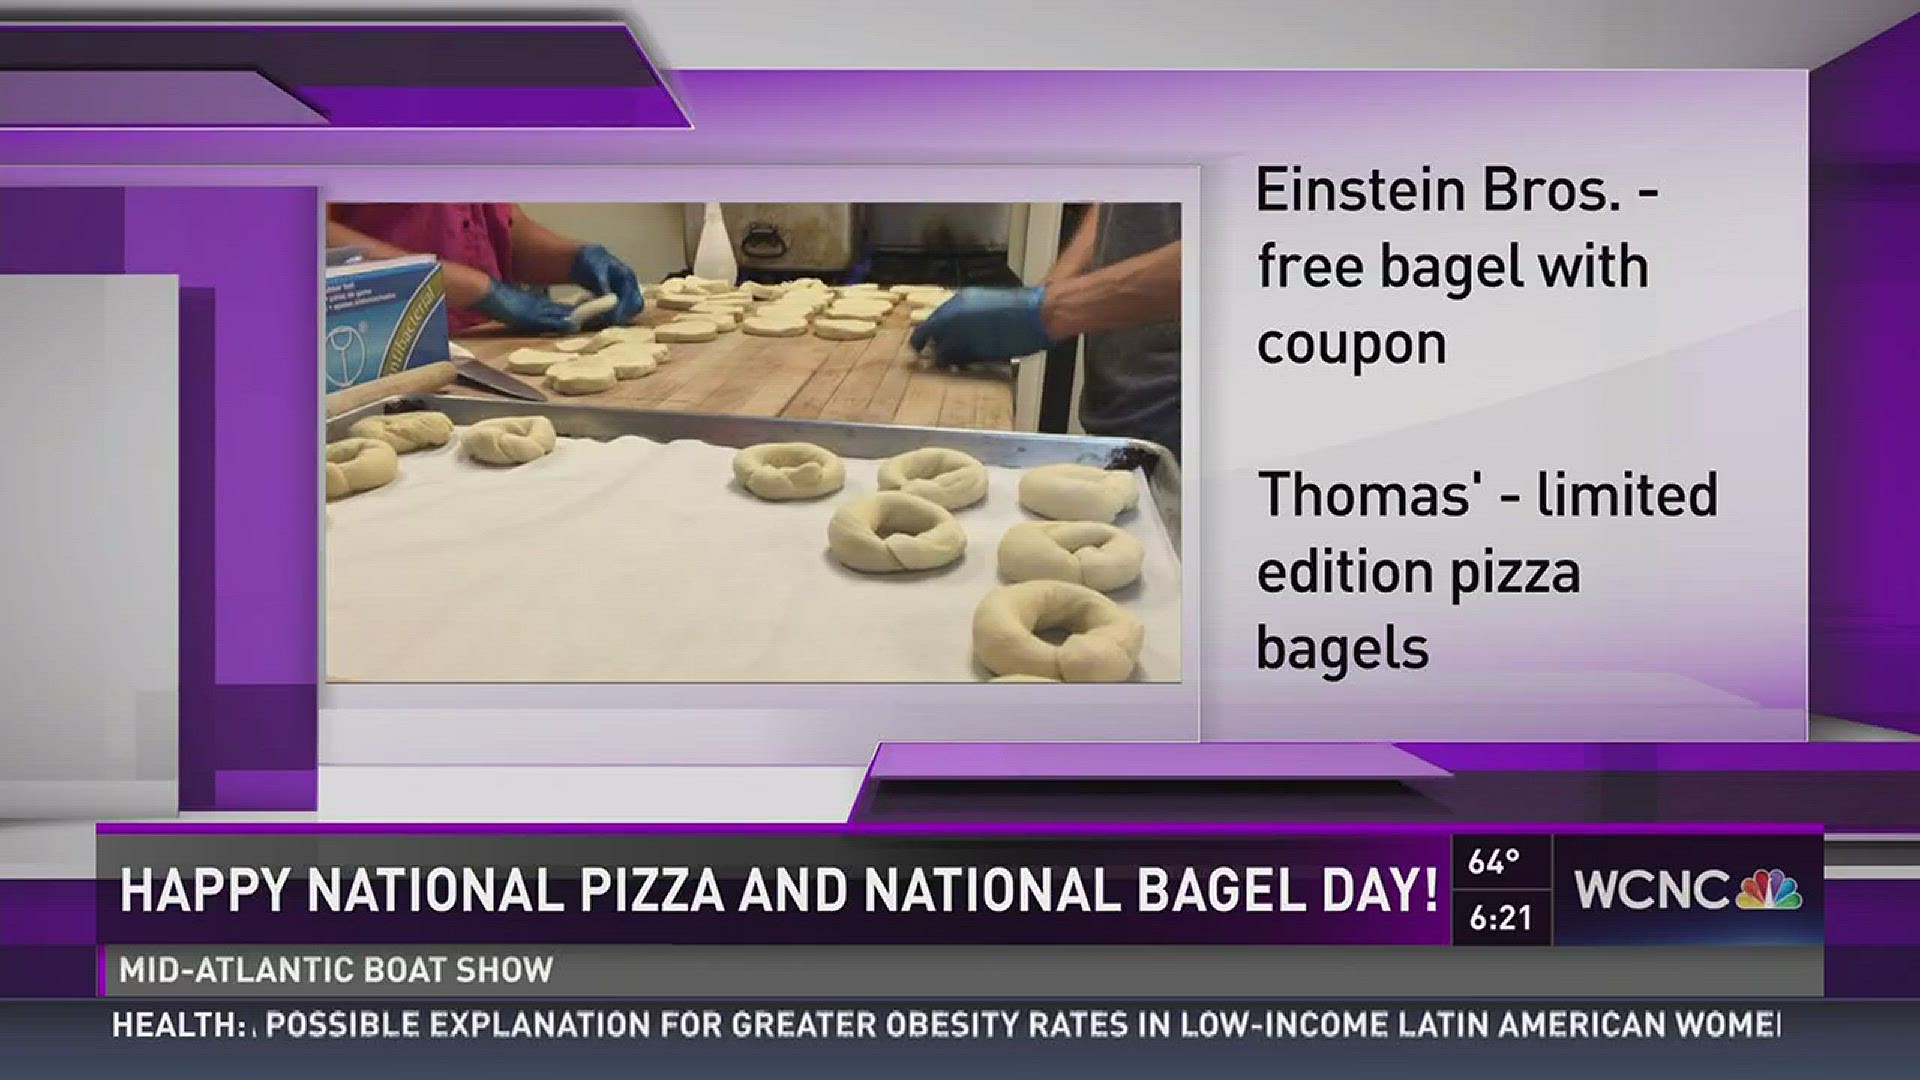 It's a delicious day for food lovers, as we celebrate bagels and pizza with freebies and deals.